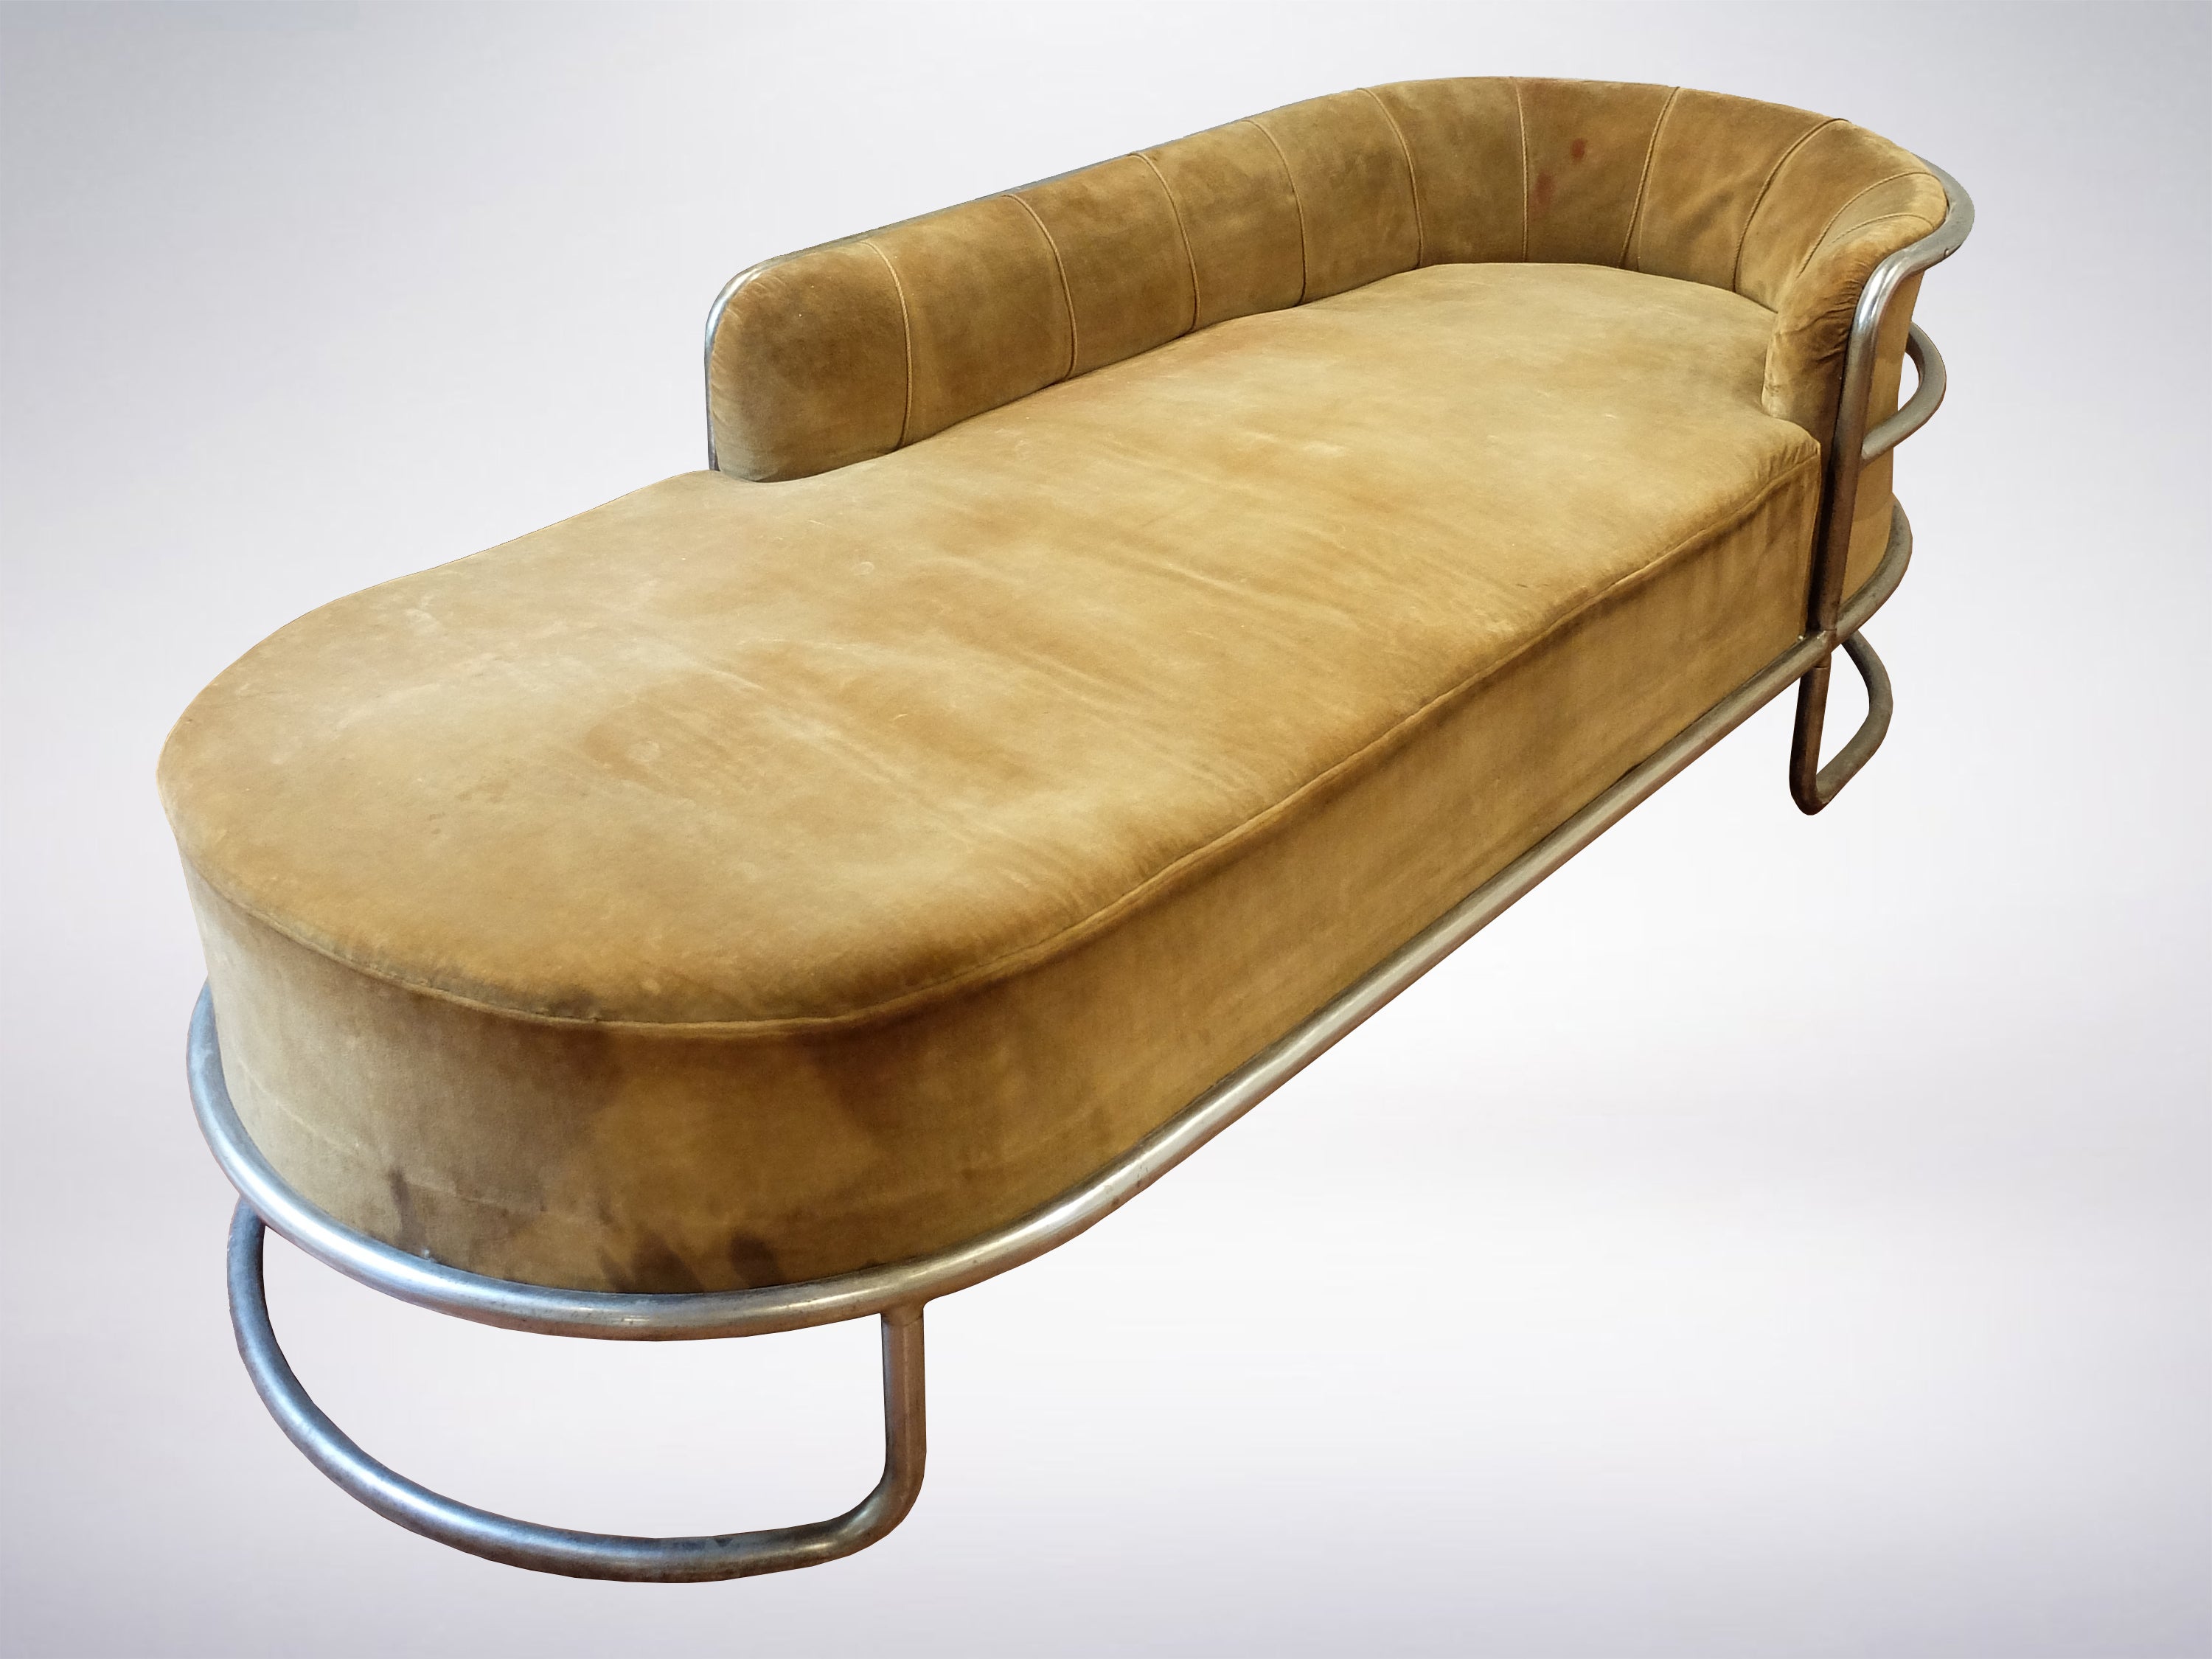 Giuseppe de Vivo sofa, 1935.

Beautiful padded velvet sofa by Giuseppe de Vivo. 
The chromed tubular steel support, with curved lines, turns it in a very interesting piece.
The velvet upholstery of the seat makes the piece valuable and highly